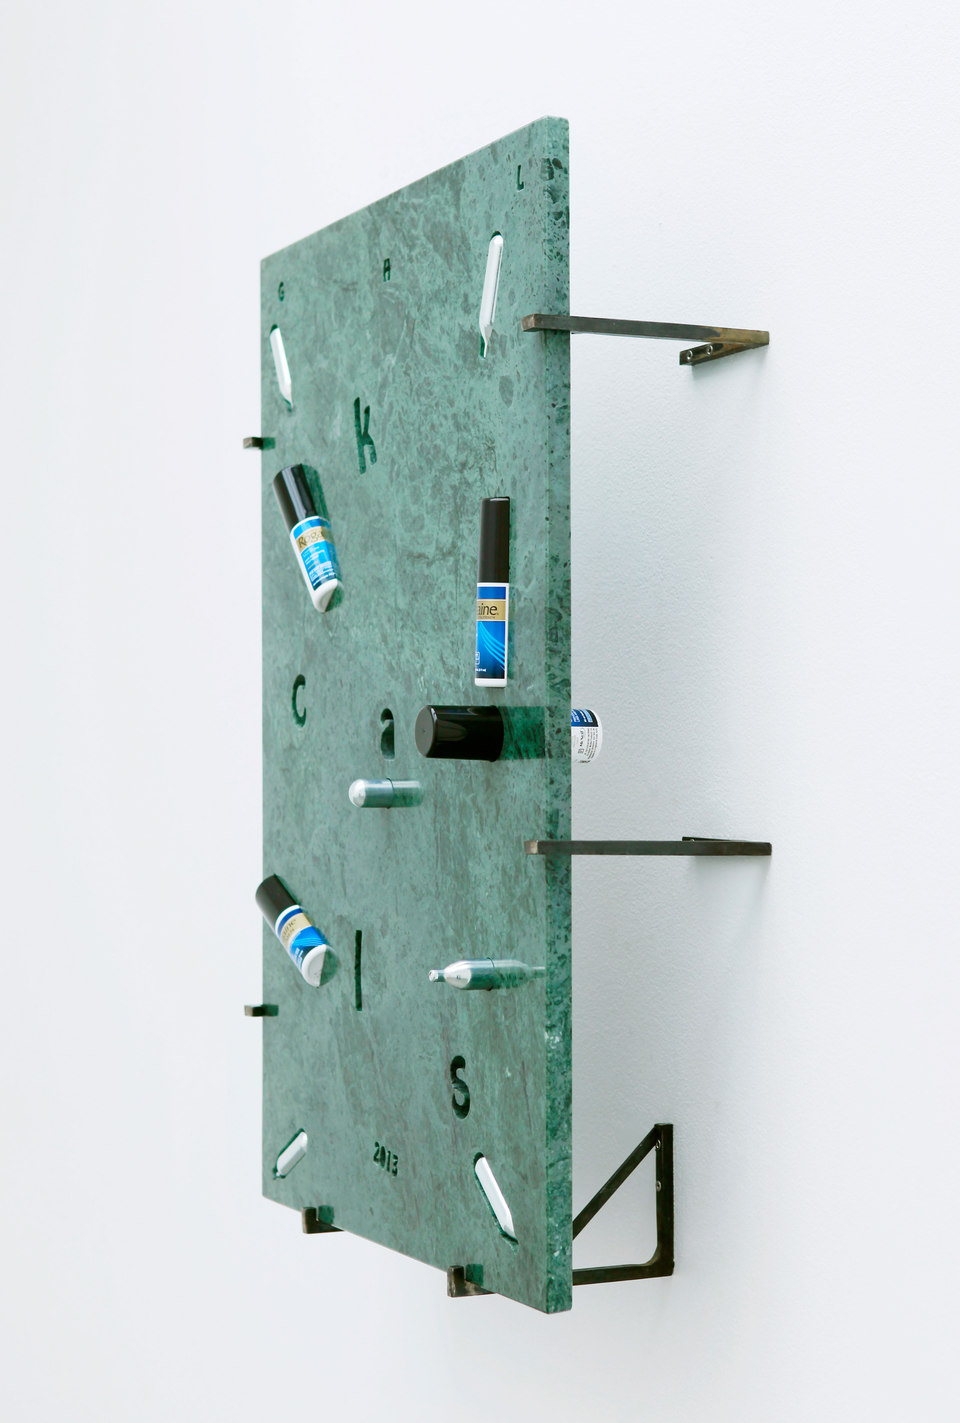 George Henry Longly, 2013: Year of the Snake, 2013, Verde Guatamala marble, whipping cream, chargers (nitrous oxide / laughing gas), Regaine (UK), Rogaine (US), Manifique (gay magazine), steel stand off fixings, 57 x 82 x 18 cm, Cell Project Space